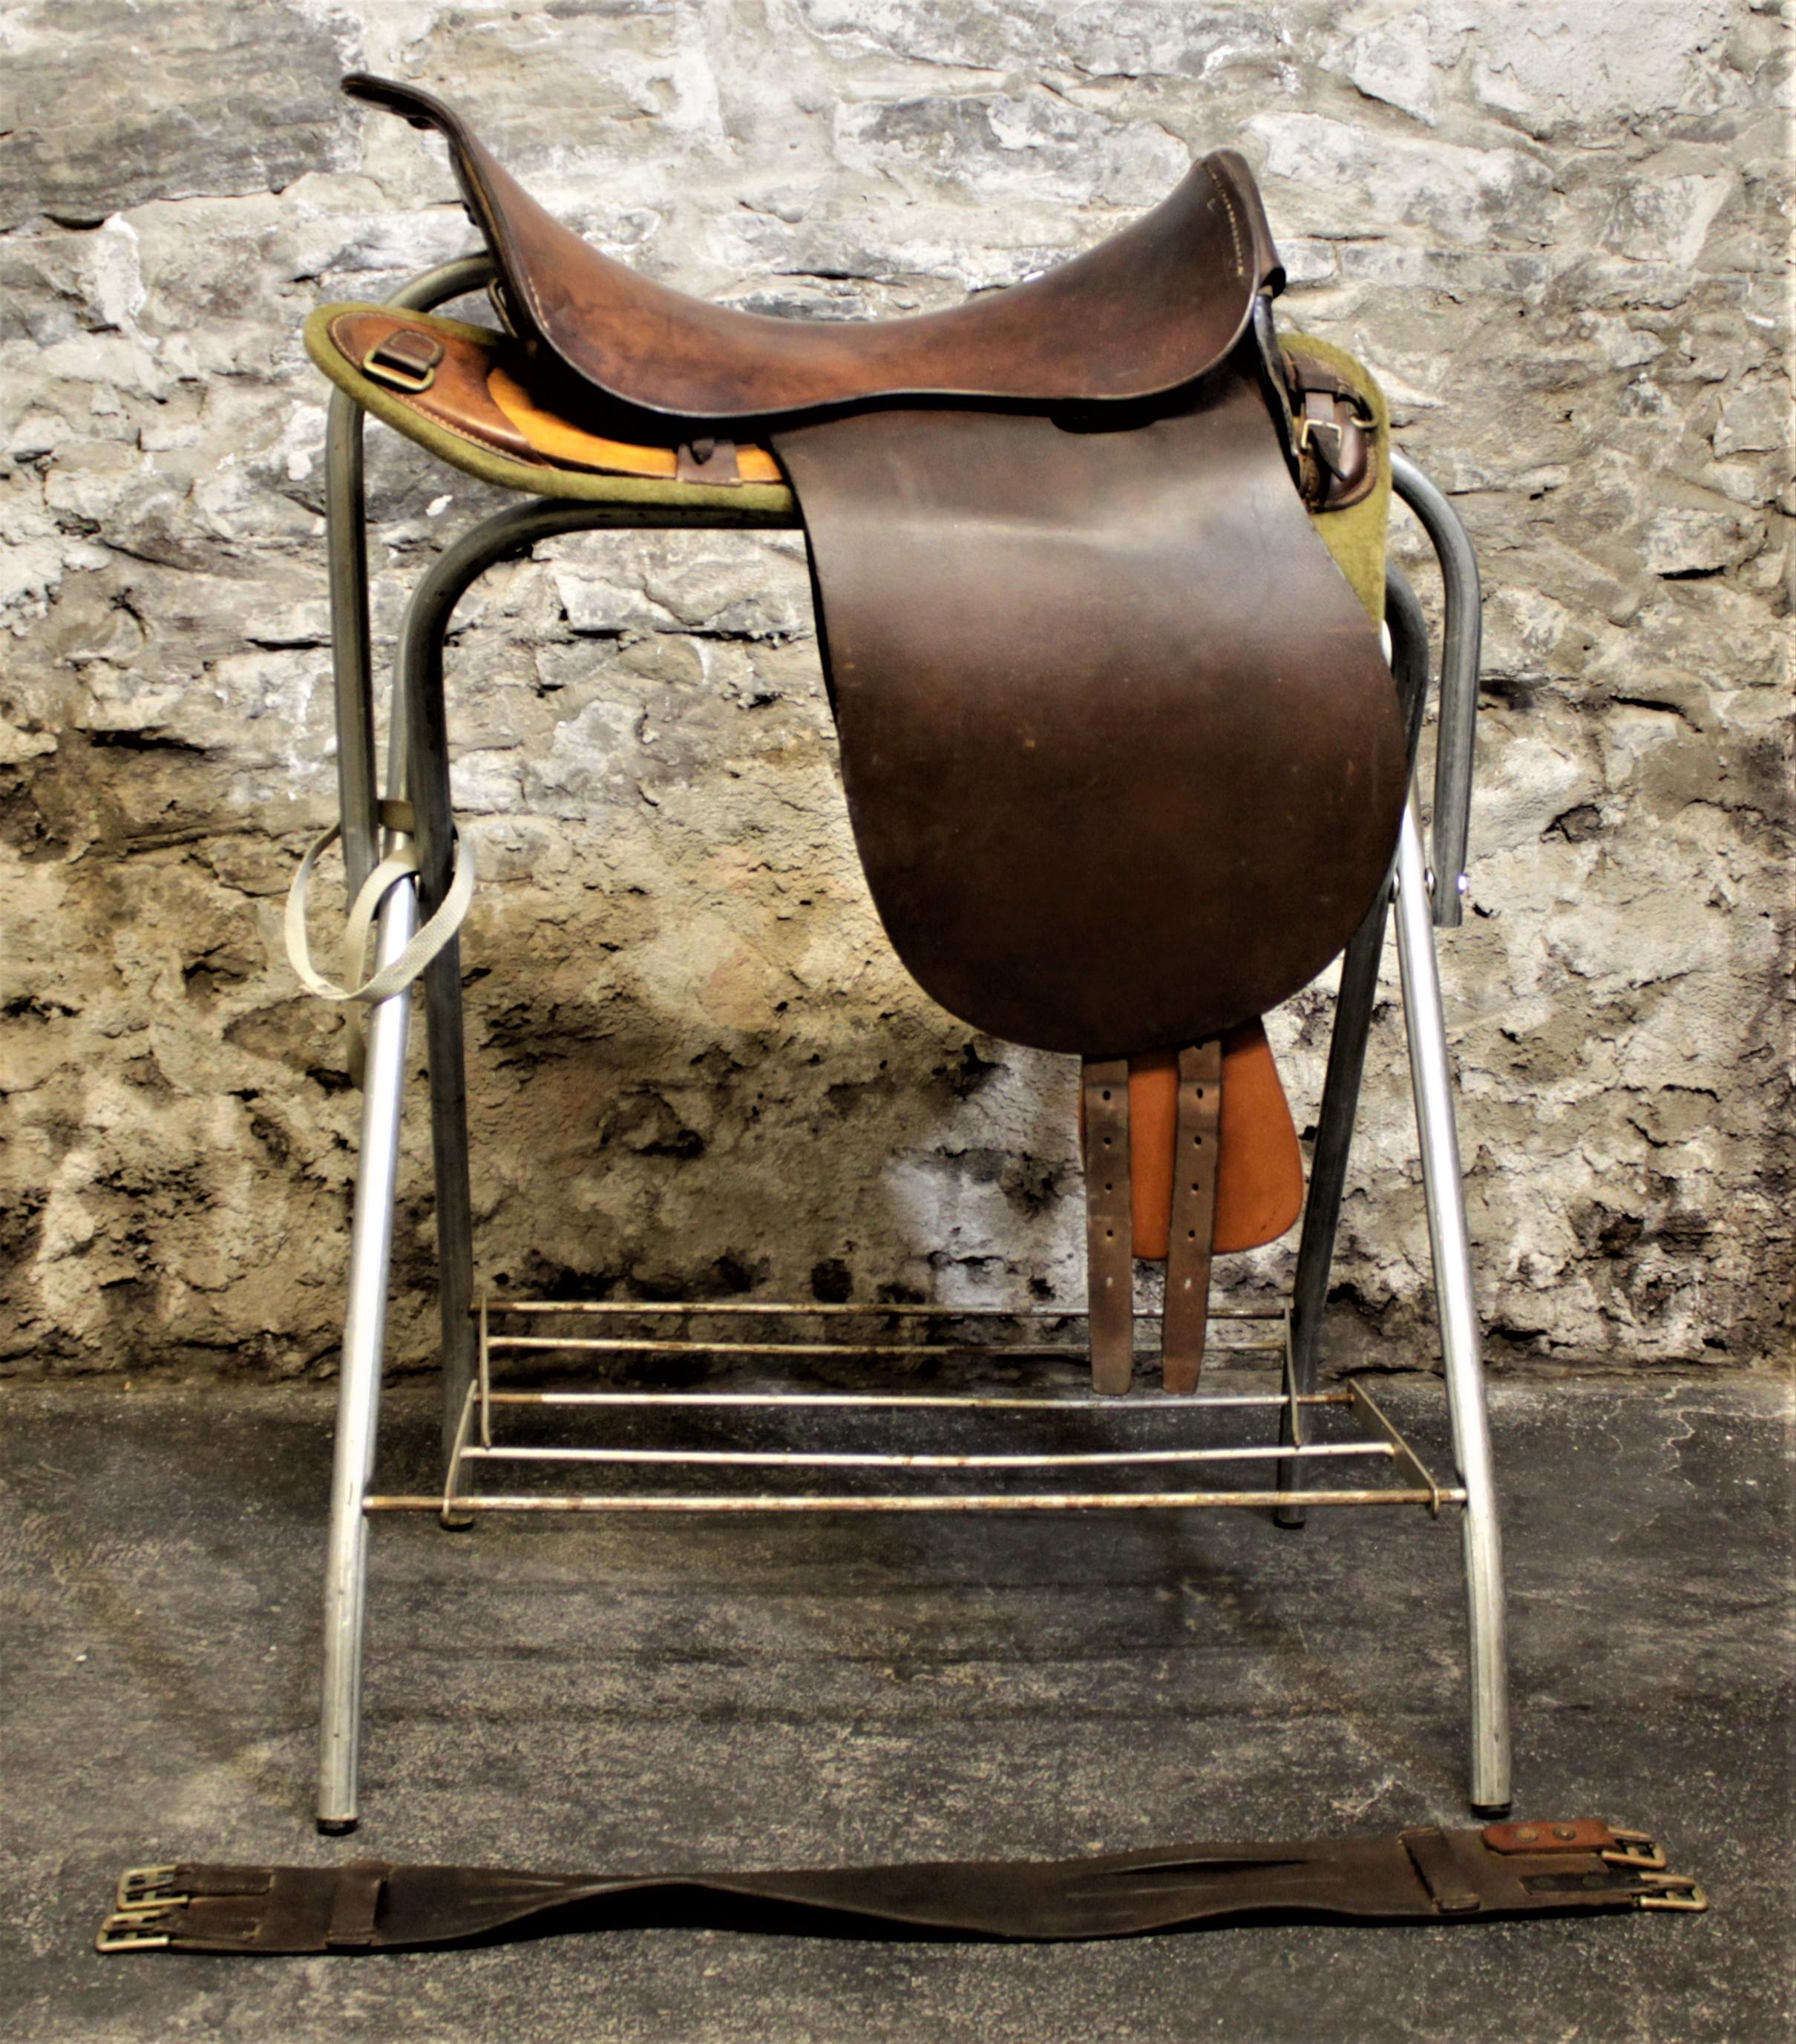 Made for the British military in 1926 by the highly renowned English leather goods maker, Barrow, Hepburn & Gale, this leather horse saddle is done in the Universal Pattern or U.P. style. The saddle has a wooden tree with steel supports, and the